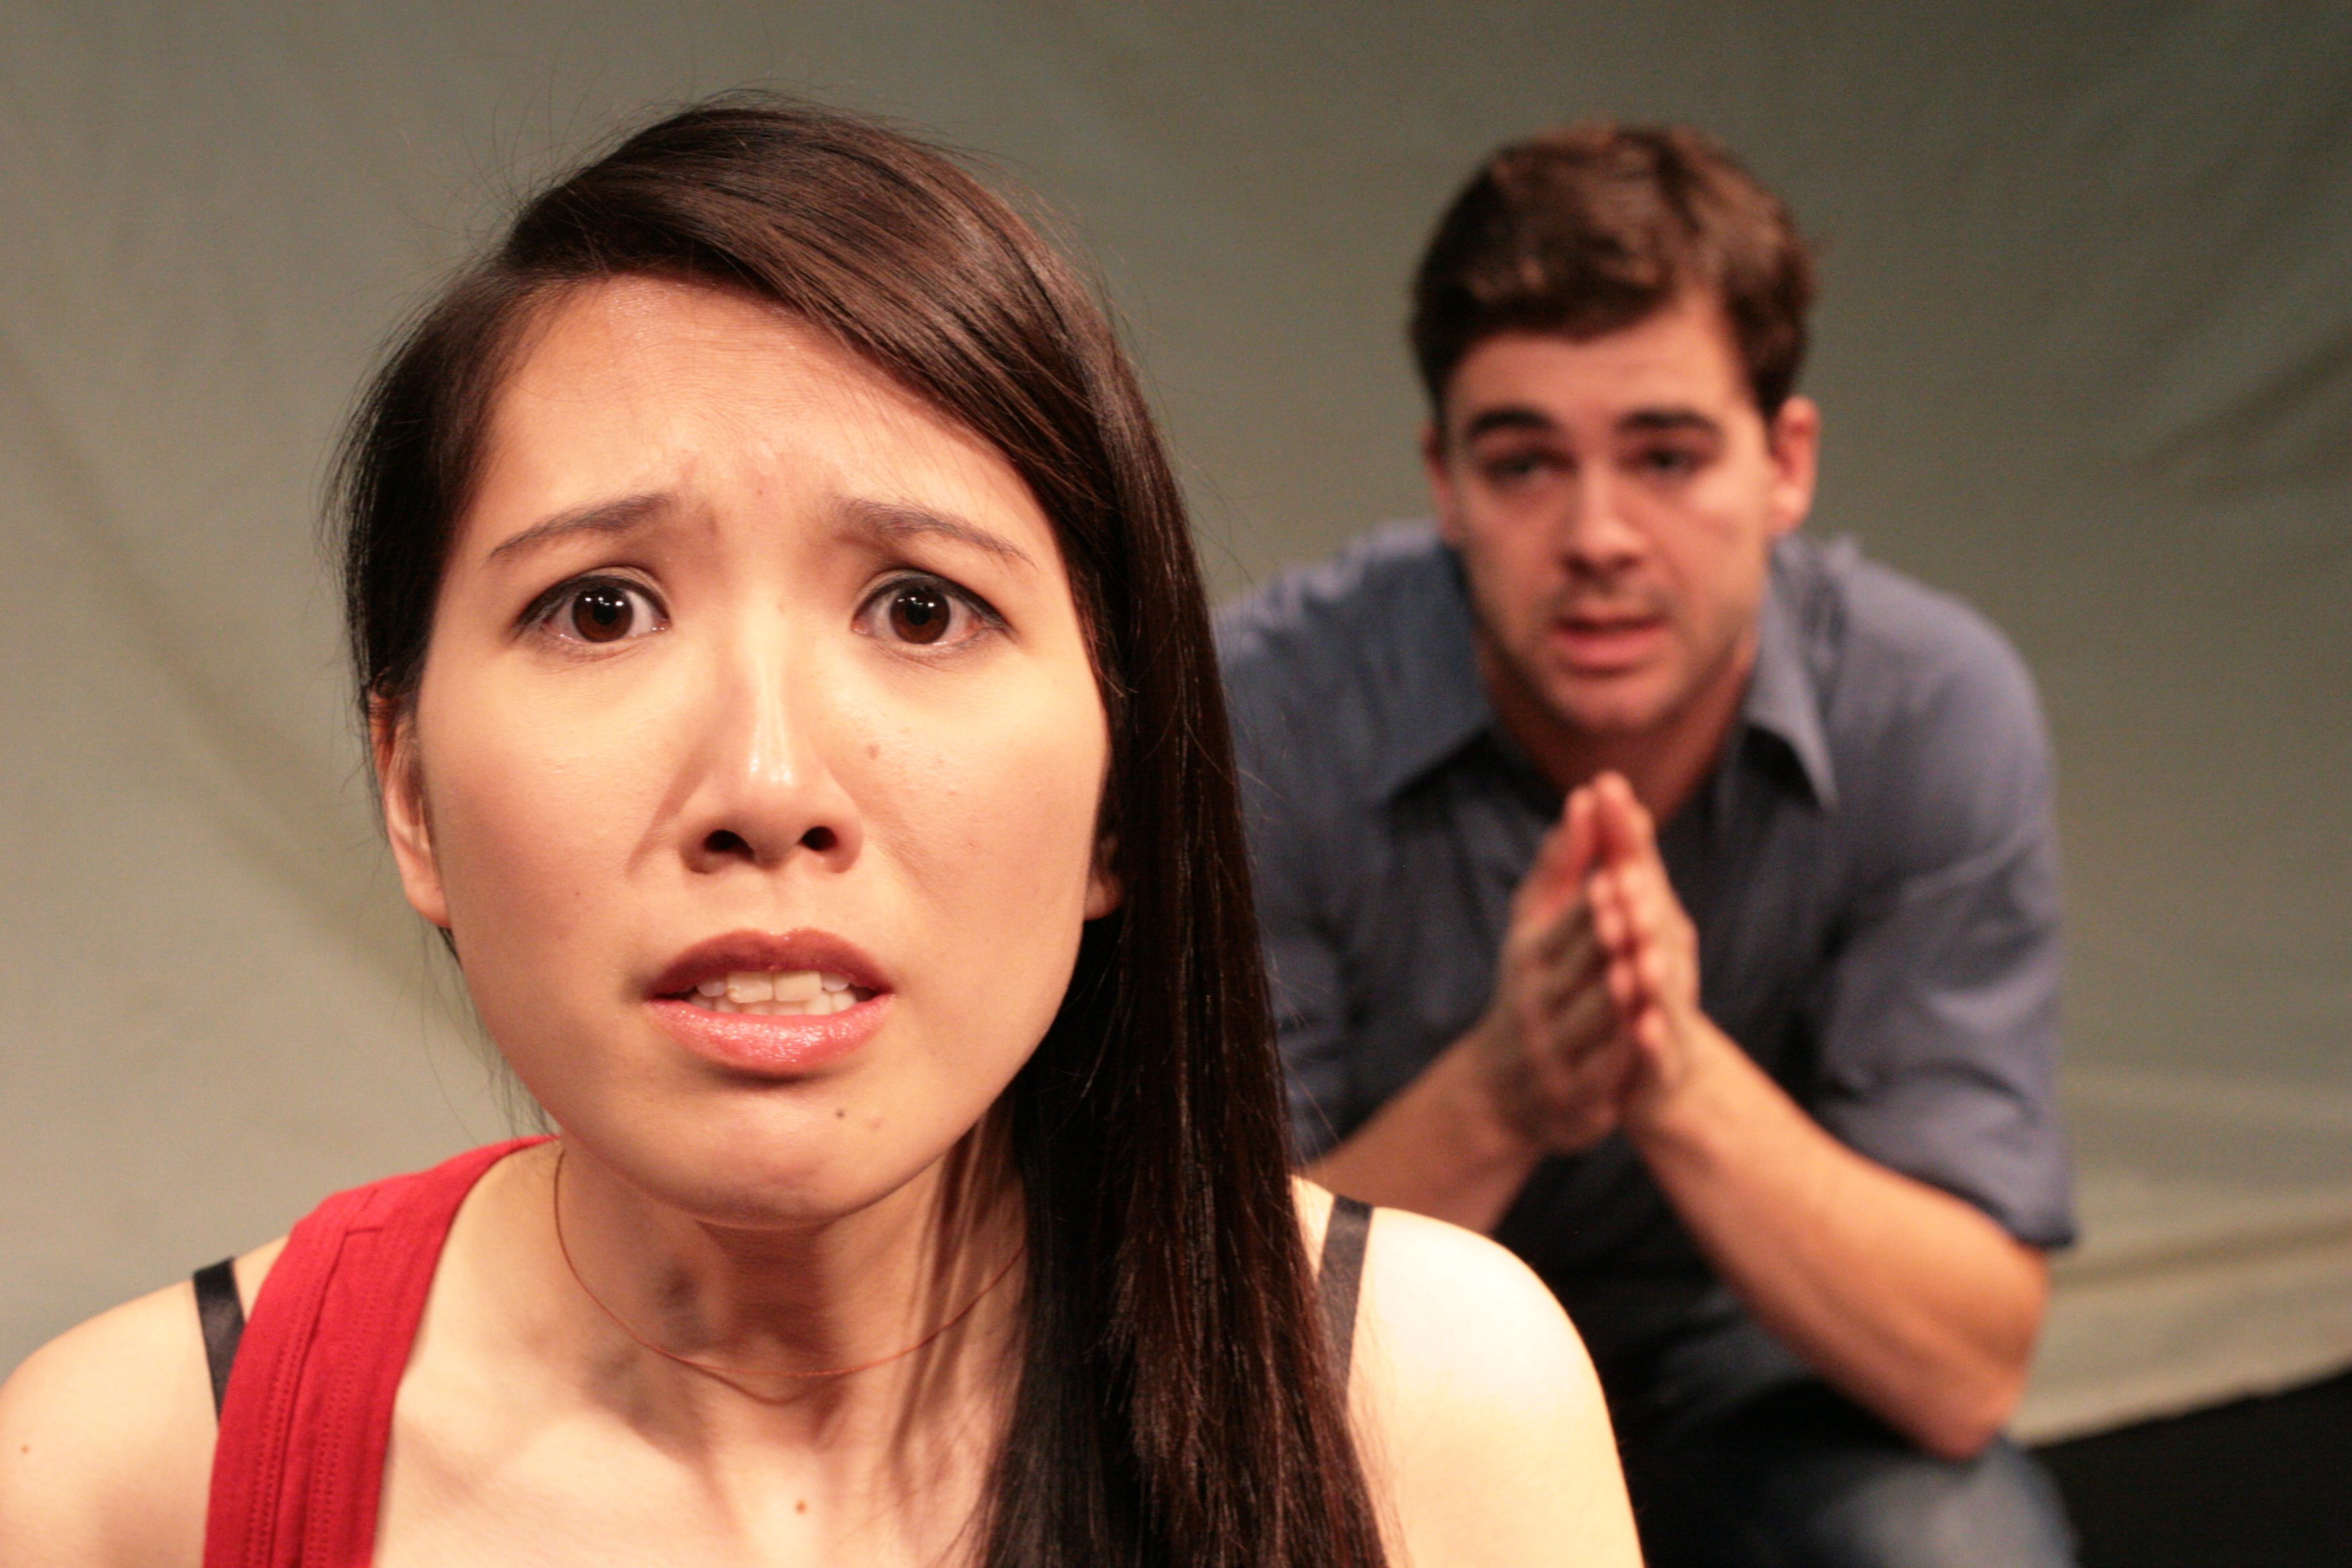 POIGNANT PLAY- Denise Wong and Aaron Krogman starred in the world premiere of She Has A Name this past spring. The play